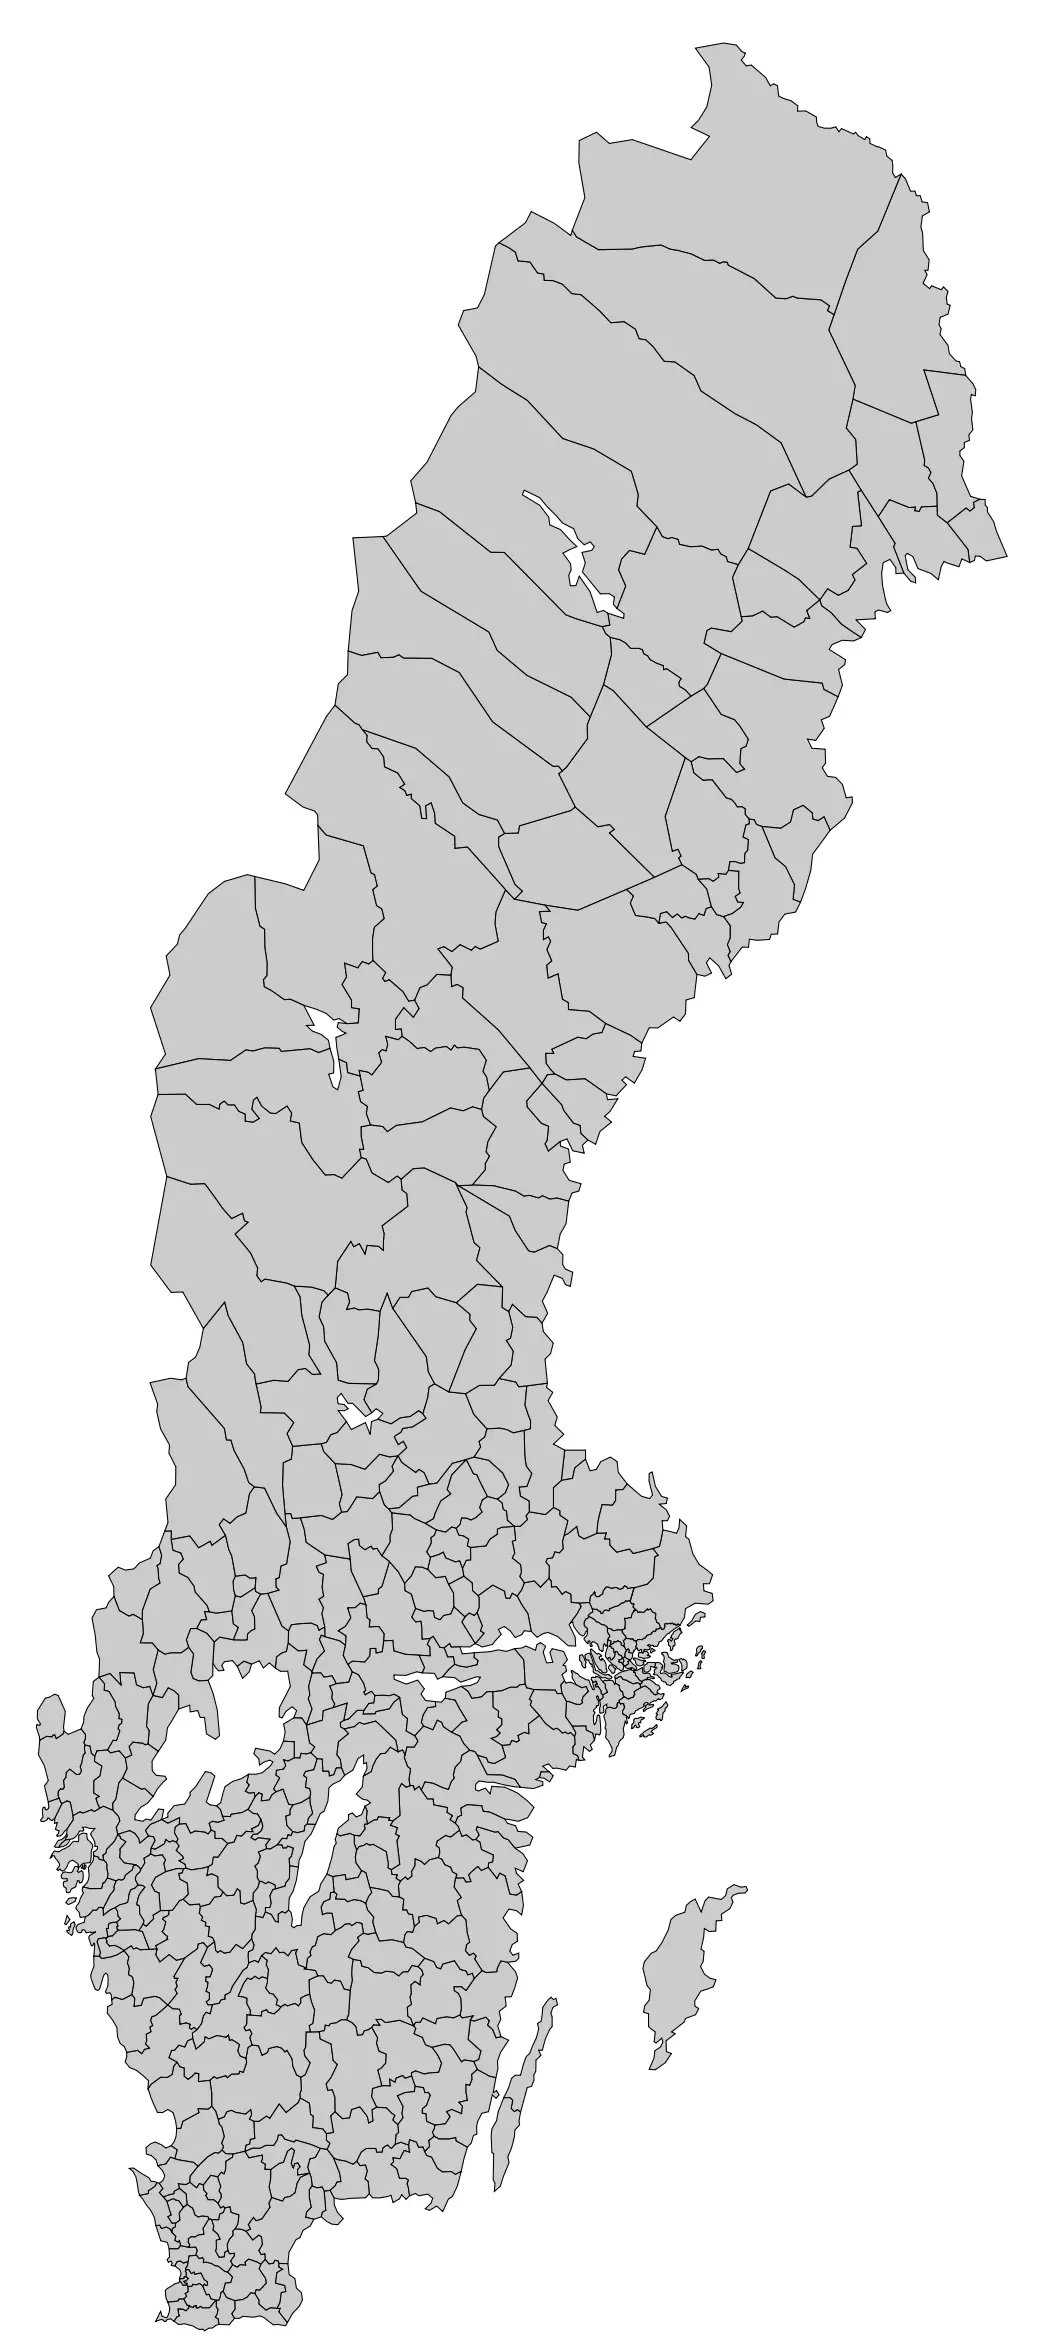 Sweden Blank Map With Municipal Borders